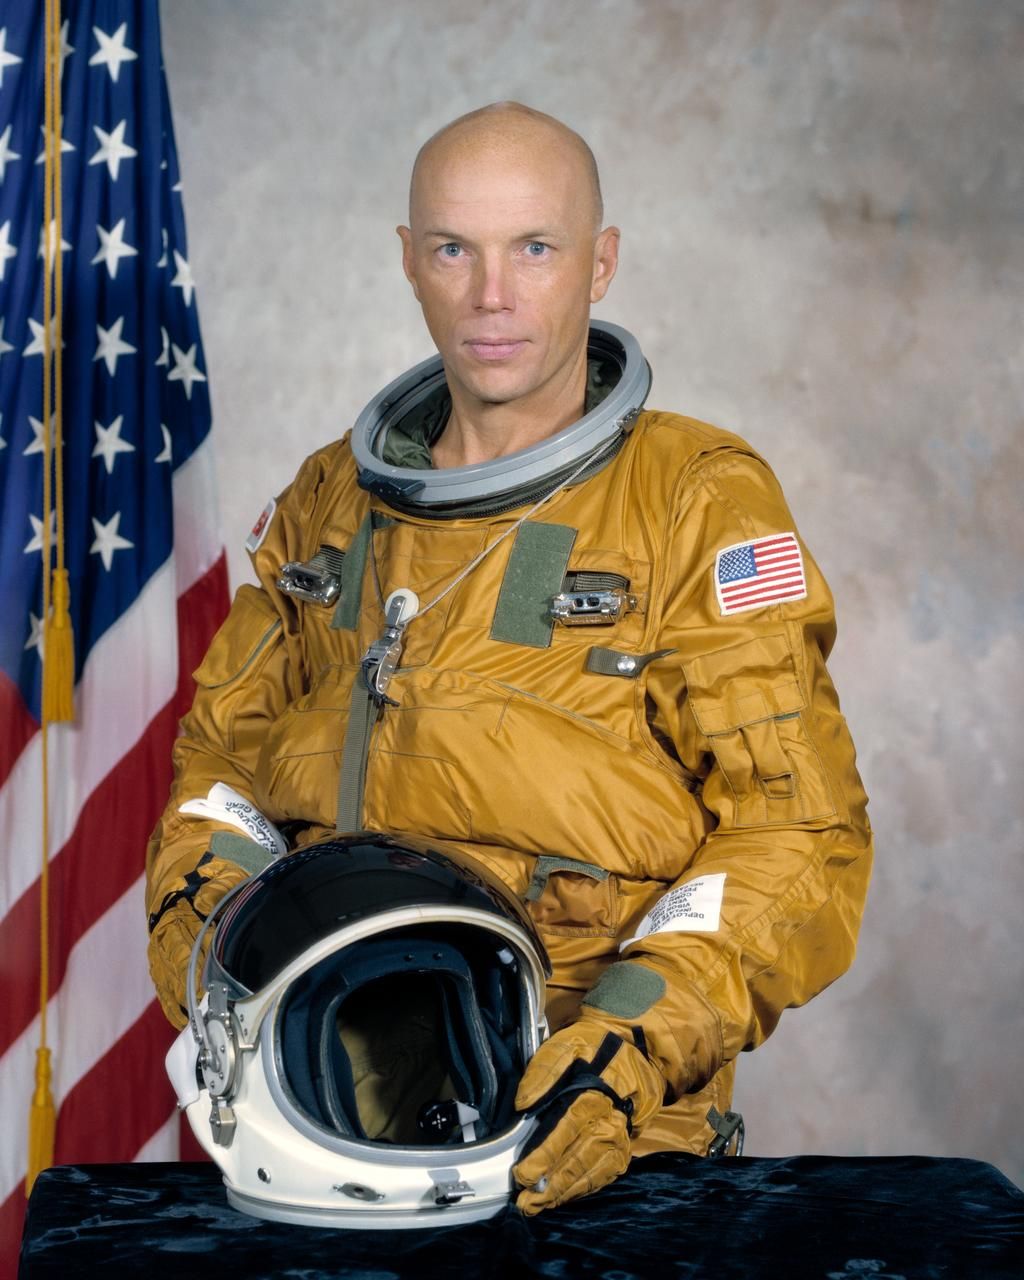 F. Story Musgrave